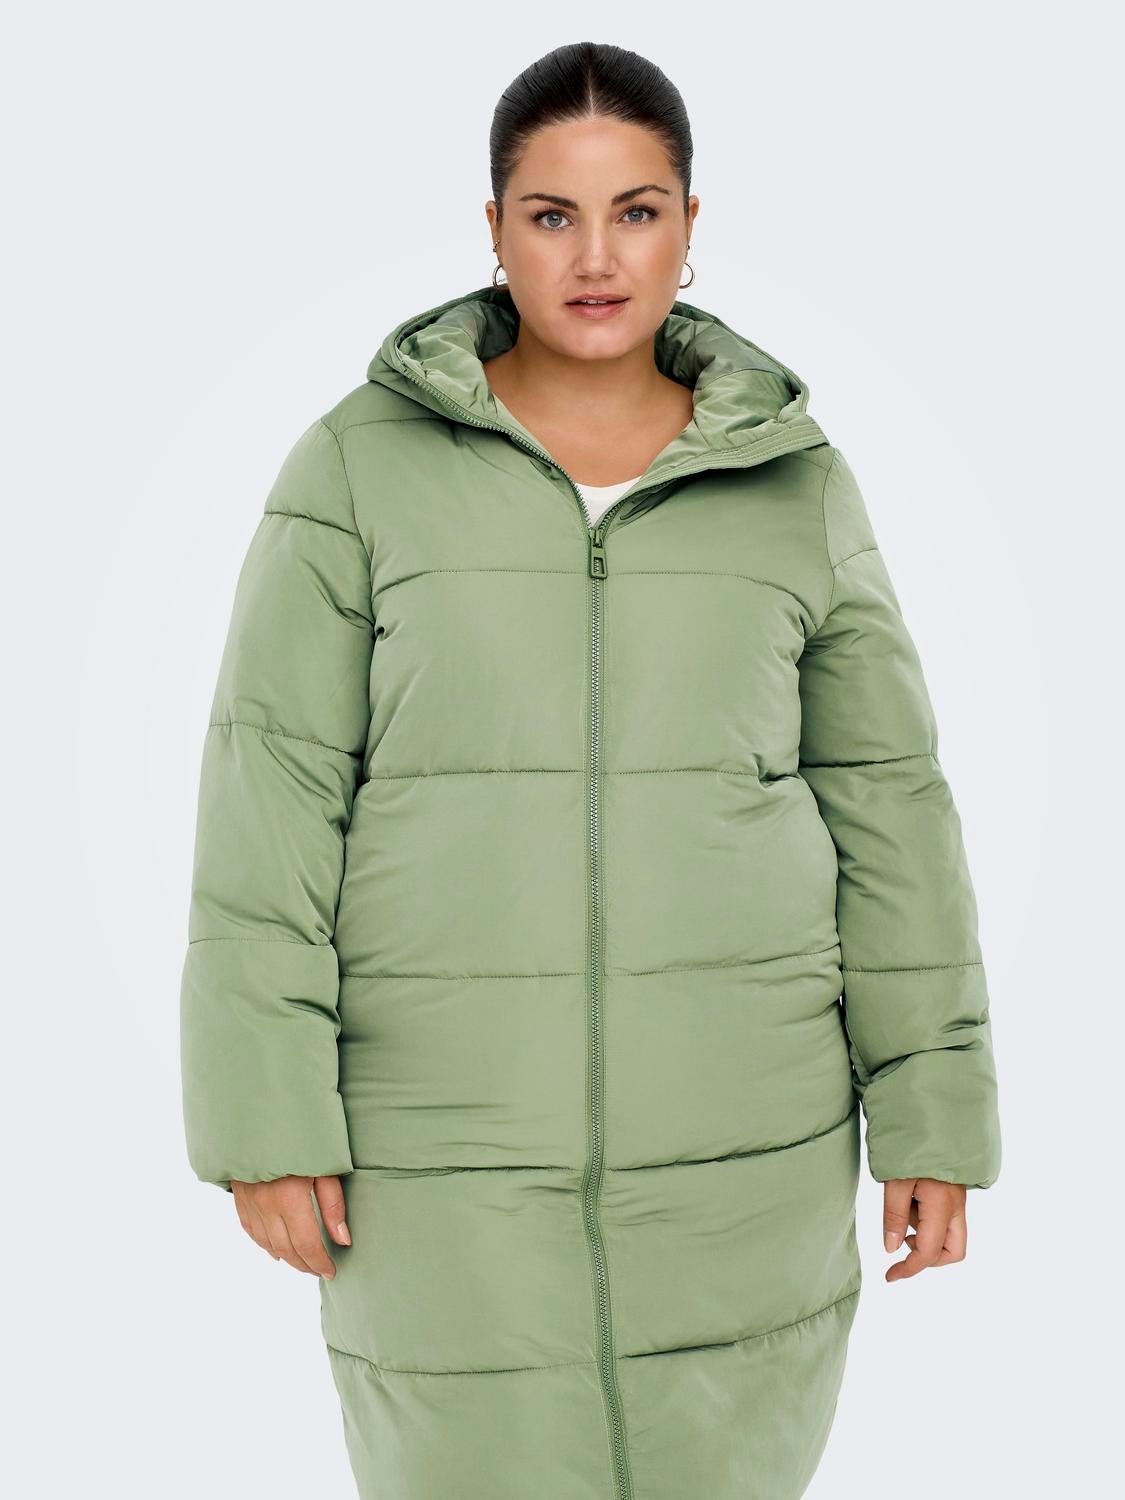 Plush and Sustainable Puffer Jackets with Gap Canada - My Curves